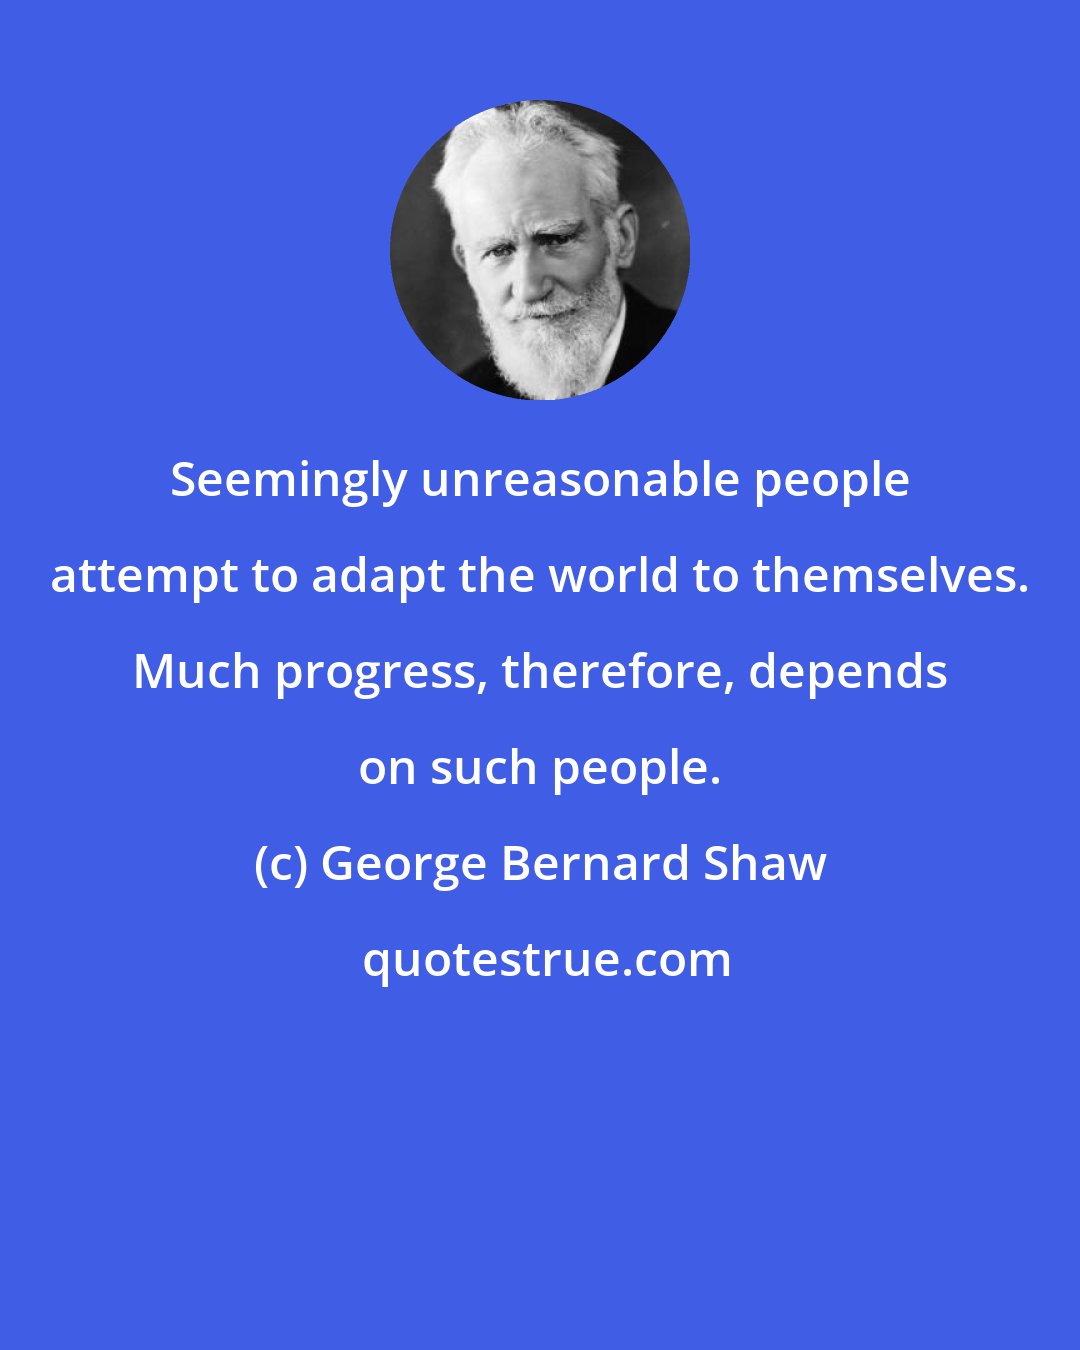 George Bernard Shaw: Seemingly unreasonable people attempt to adapt the world to themselves. Much progress, therefore, depends on such people.